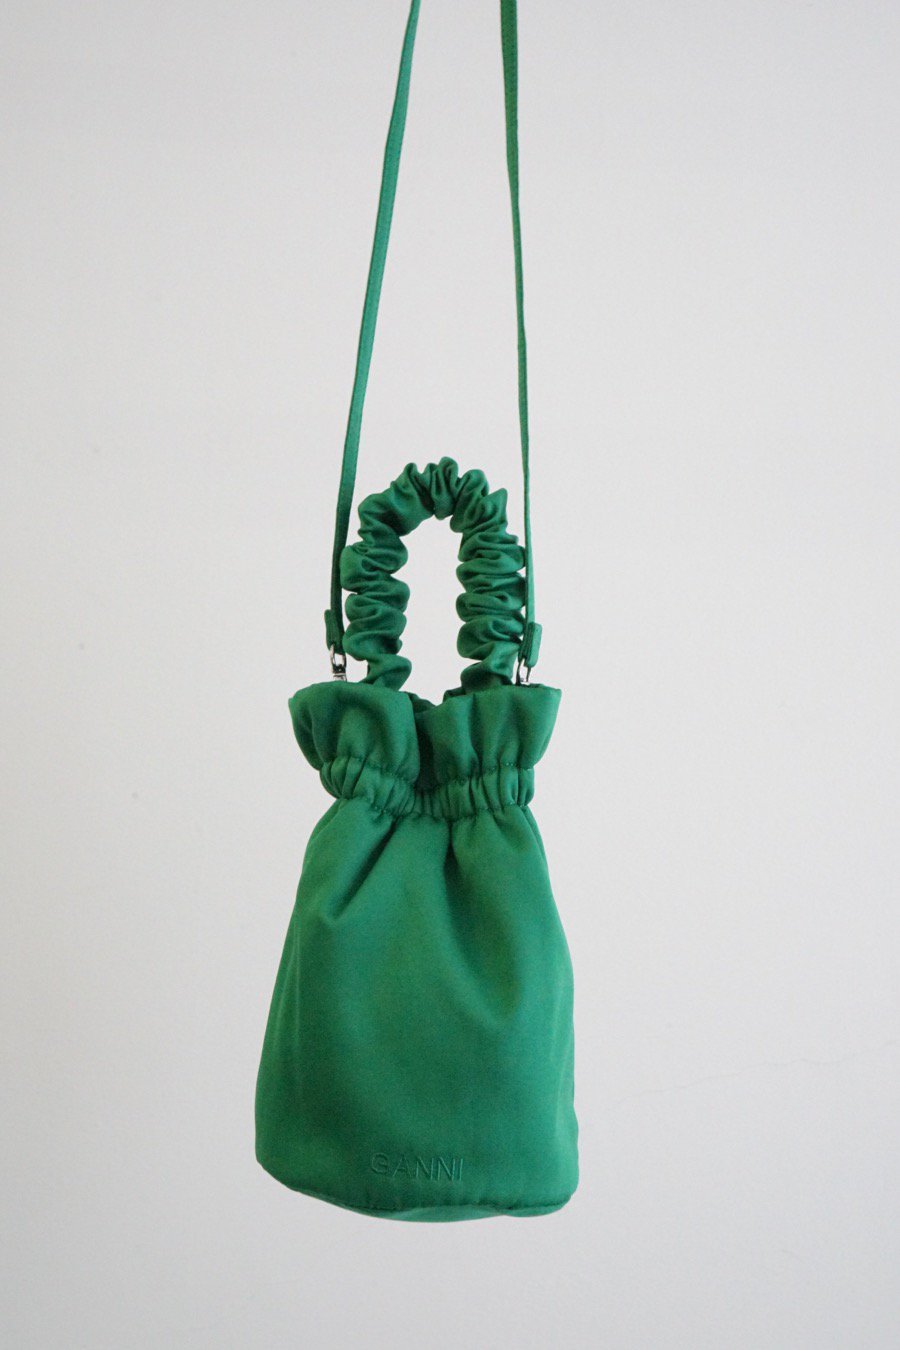 GANNI / OCCASION RUCHED TOP HANDLE BAG / KELLY GREEN ...